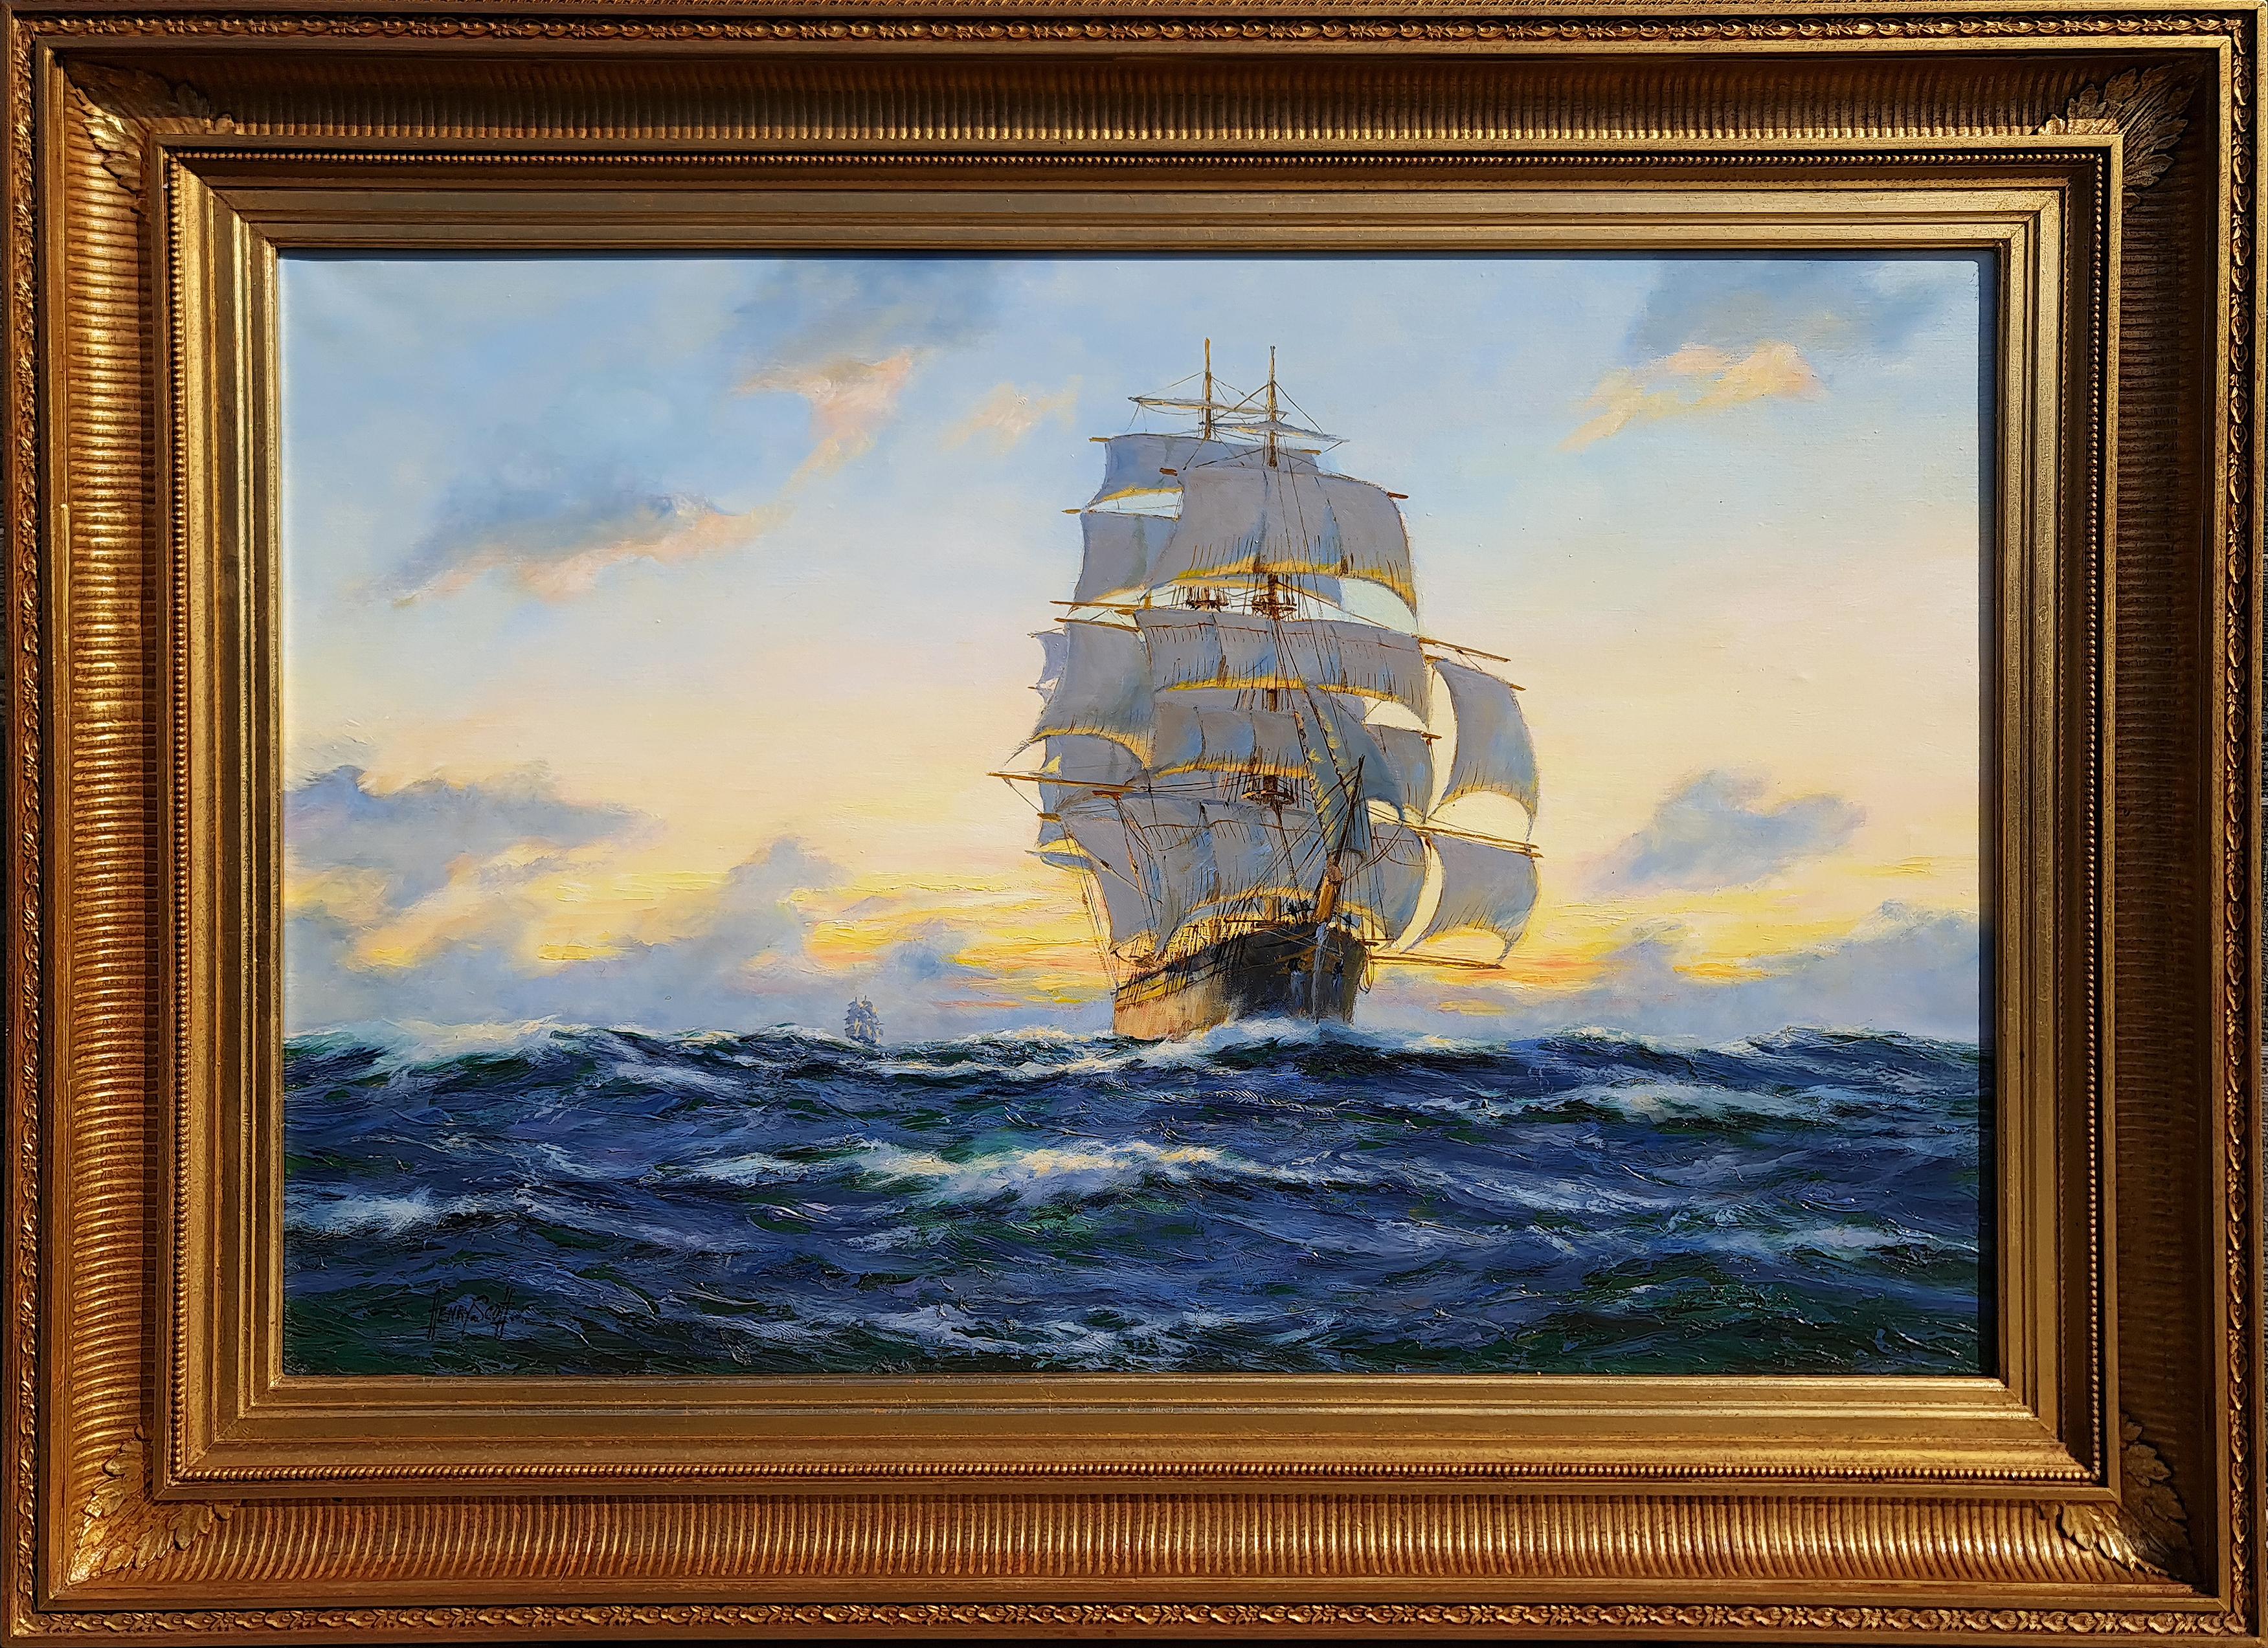 Henry Scott Landscape Painting - Sunset, Western Pacific, 'Cutty Sark' Sailing